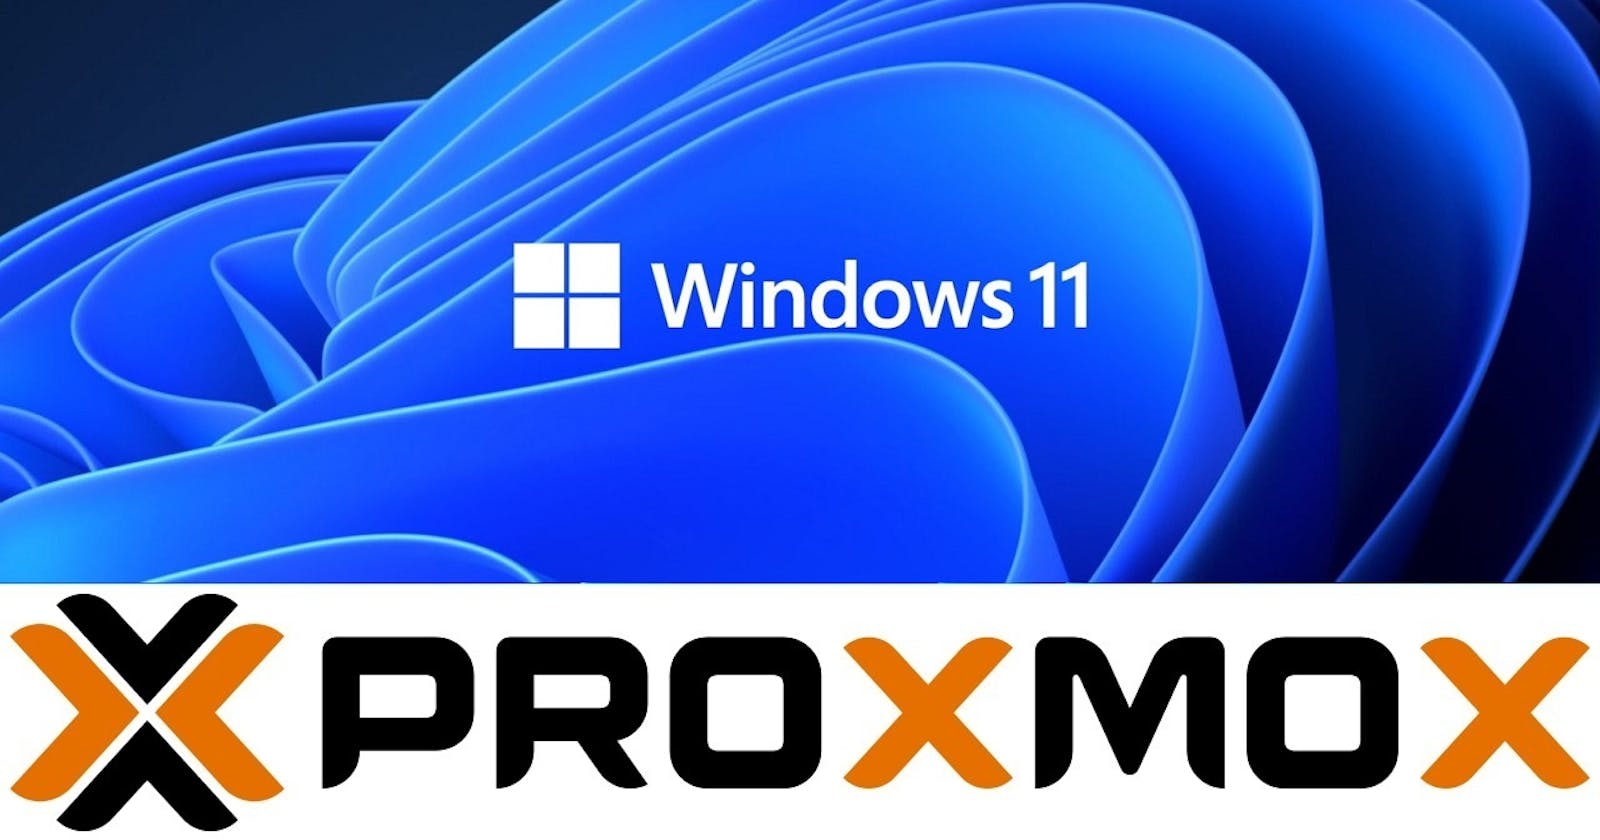 HowTo install & configure Windows 11 in a VM on Proxmox VE 7.1 - step-by-step